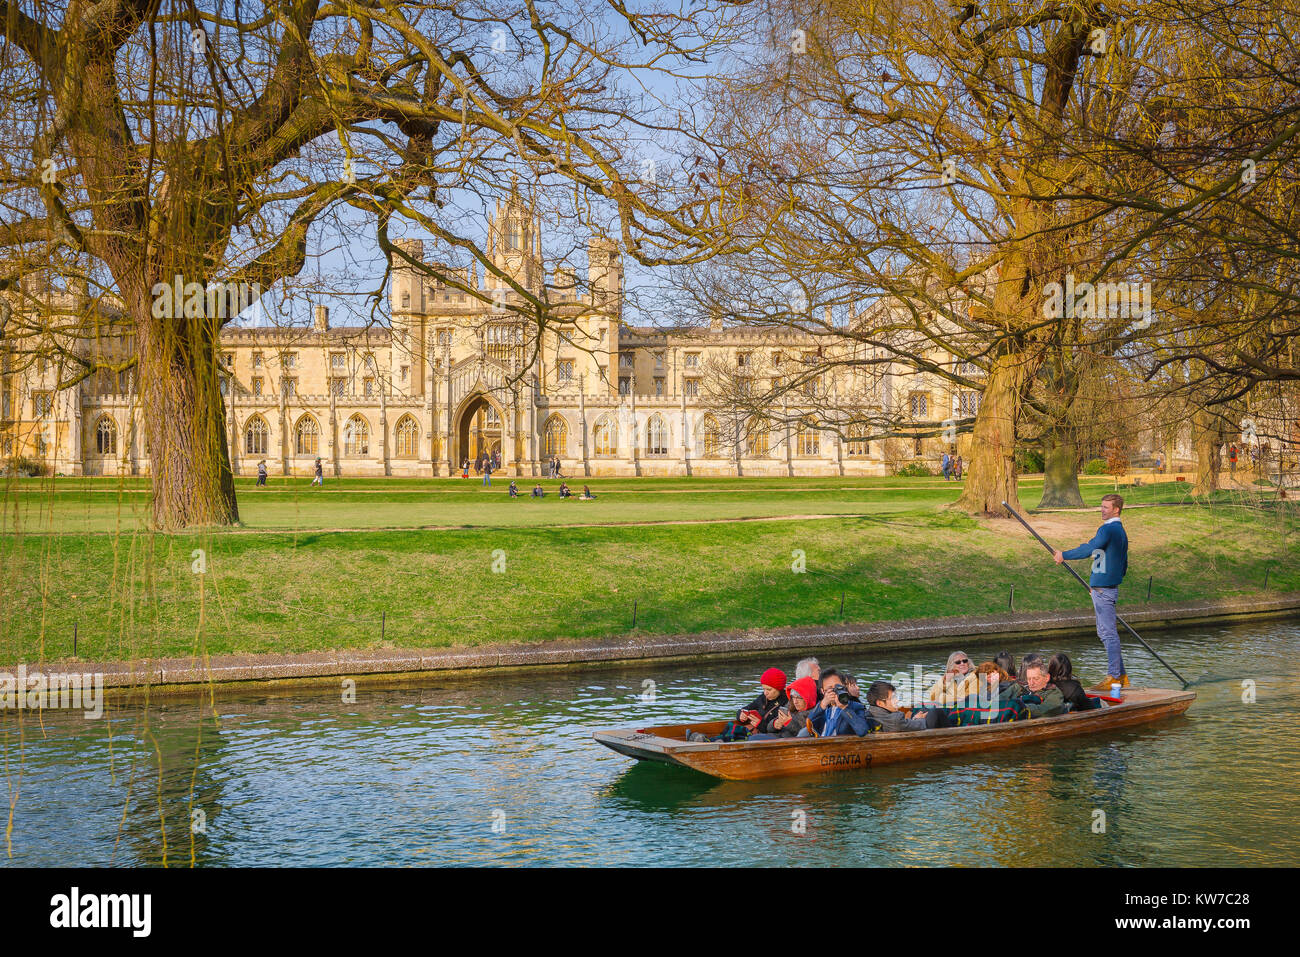 Punting Cambridge UK, on a spring morning in Cambridge, UK, tourists take a trip in a punt on the River Cam, gliding past St John's College. Stock Photo